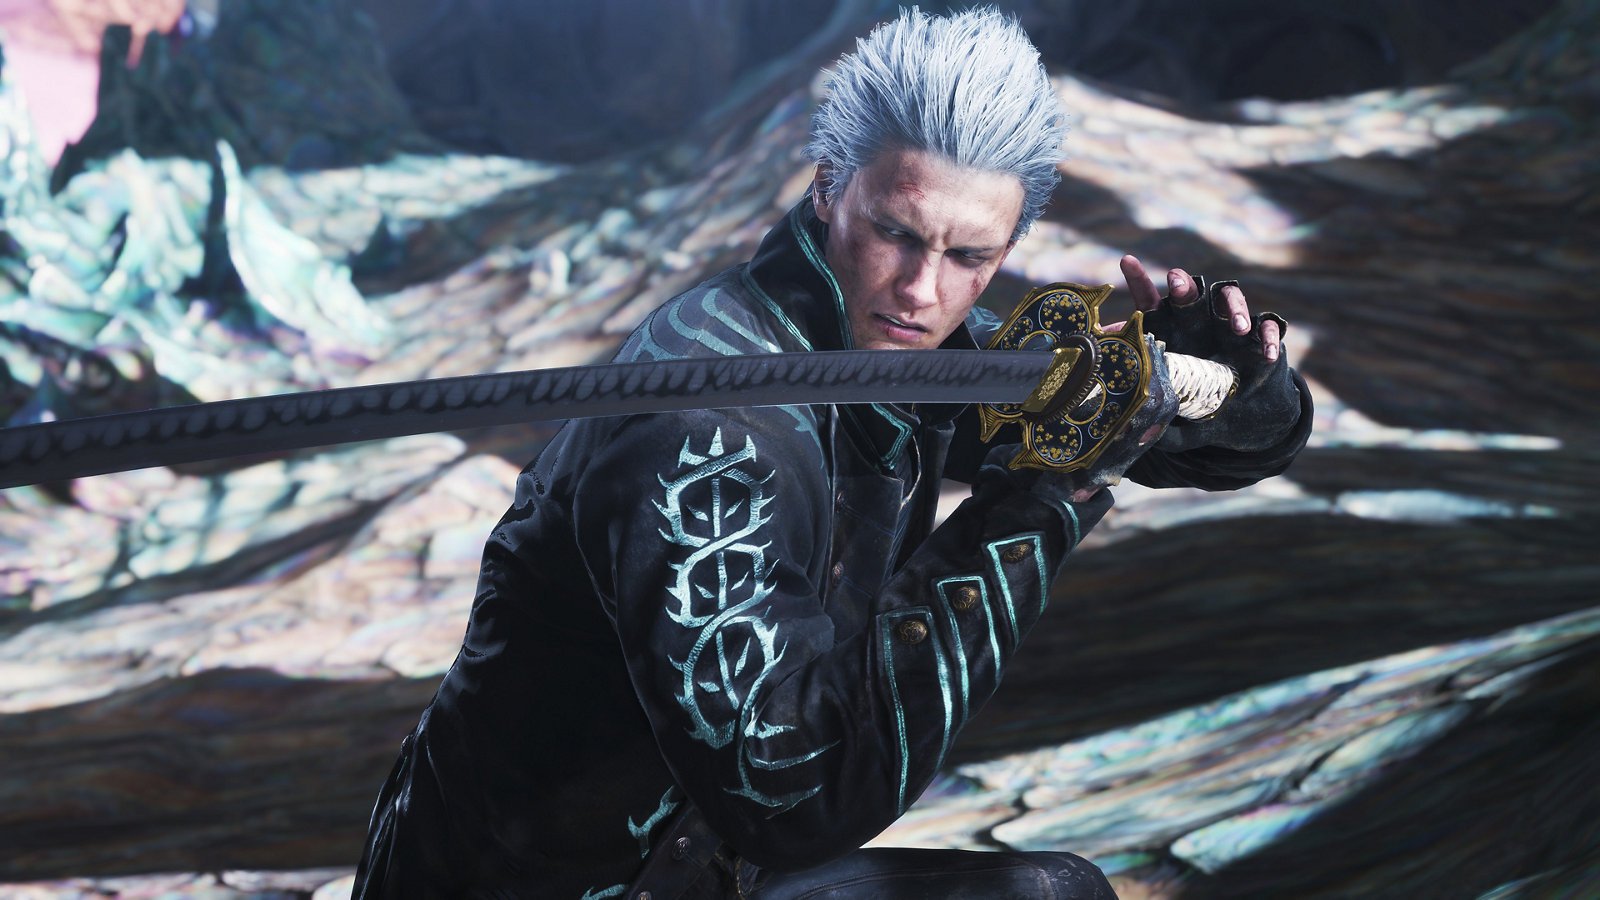 Devil May Cry 5 has sold 6 million copies